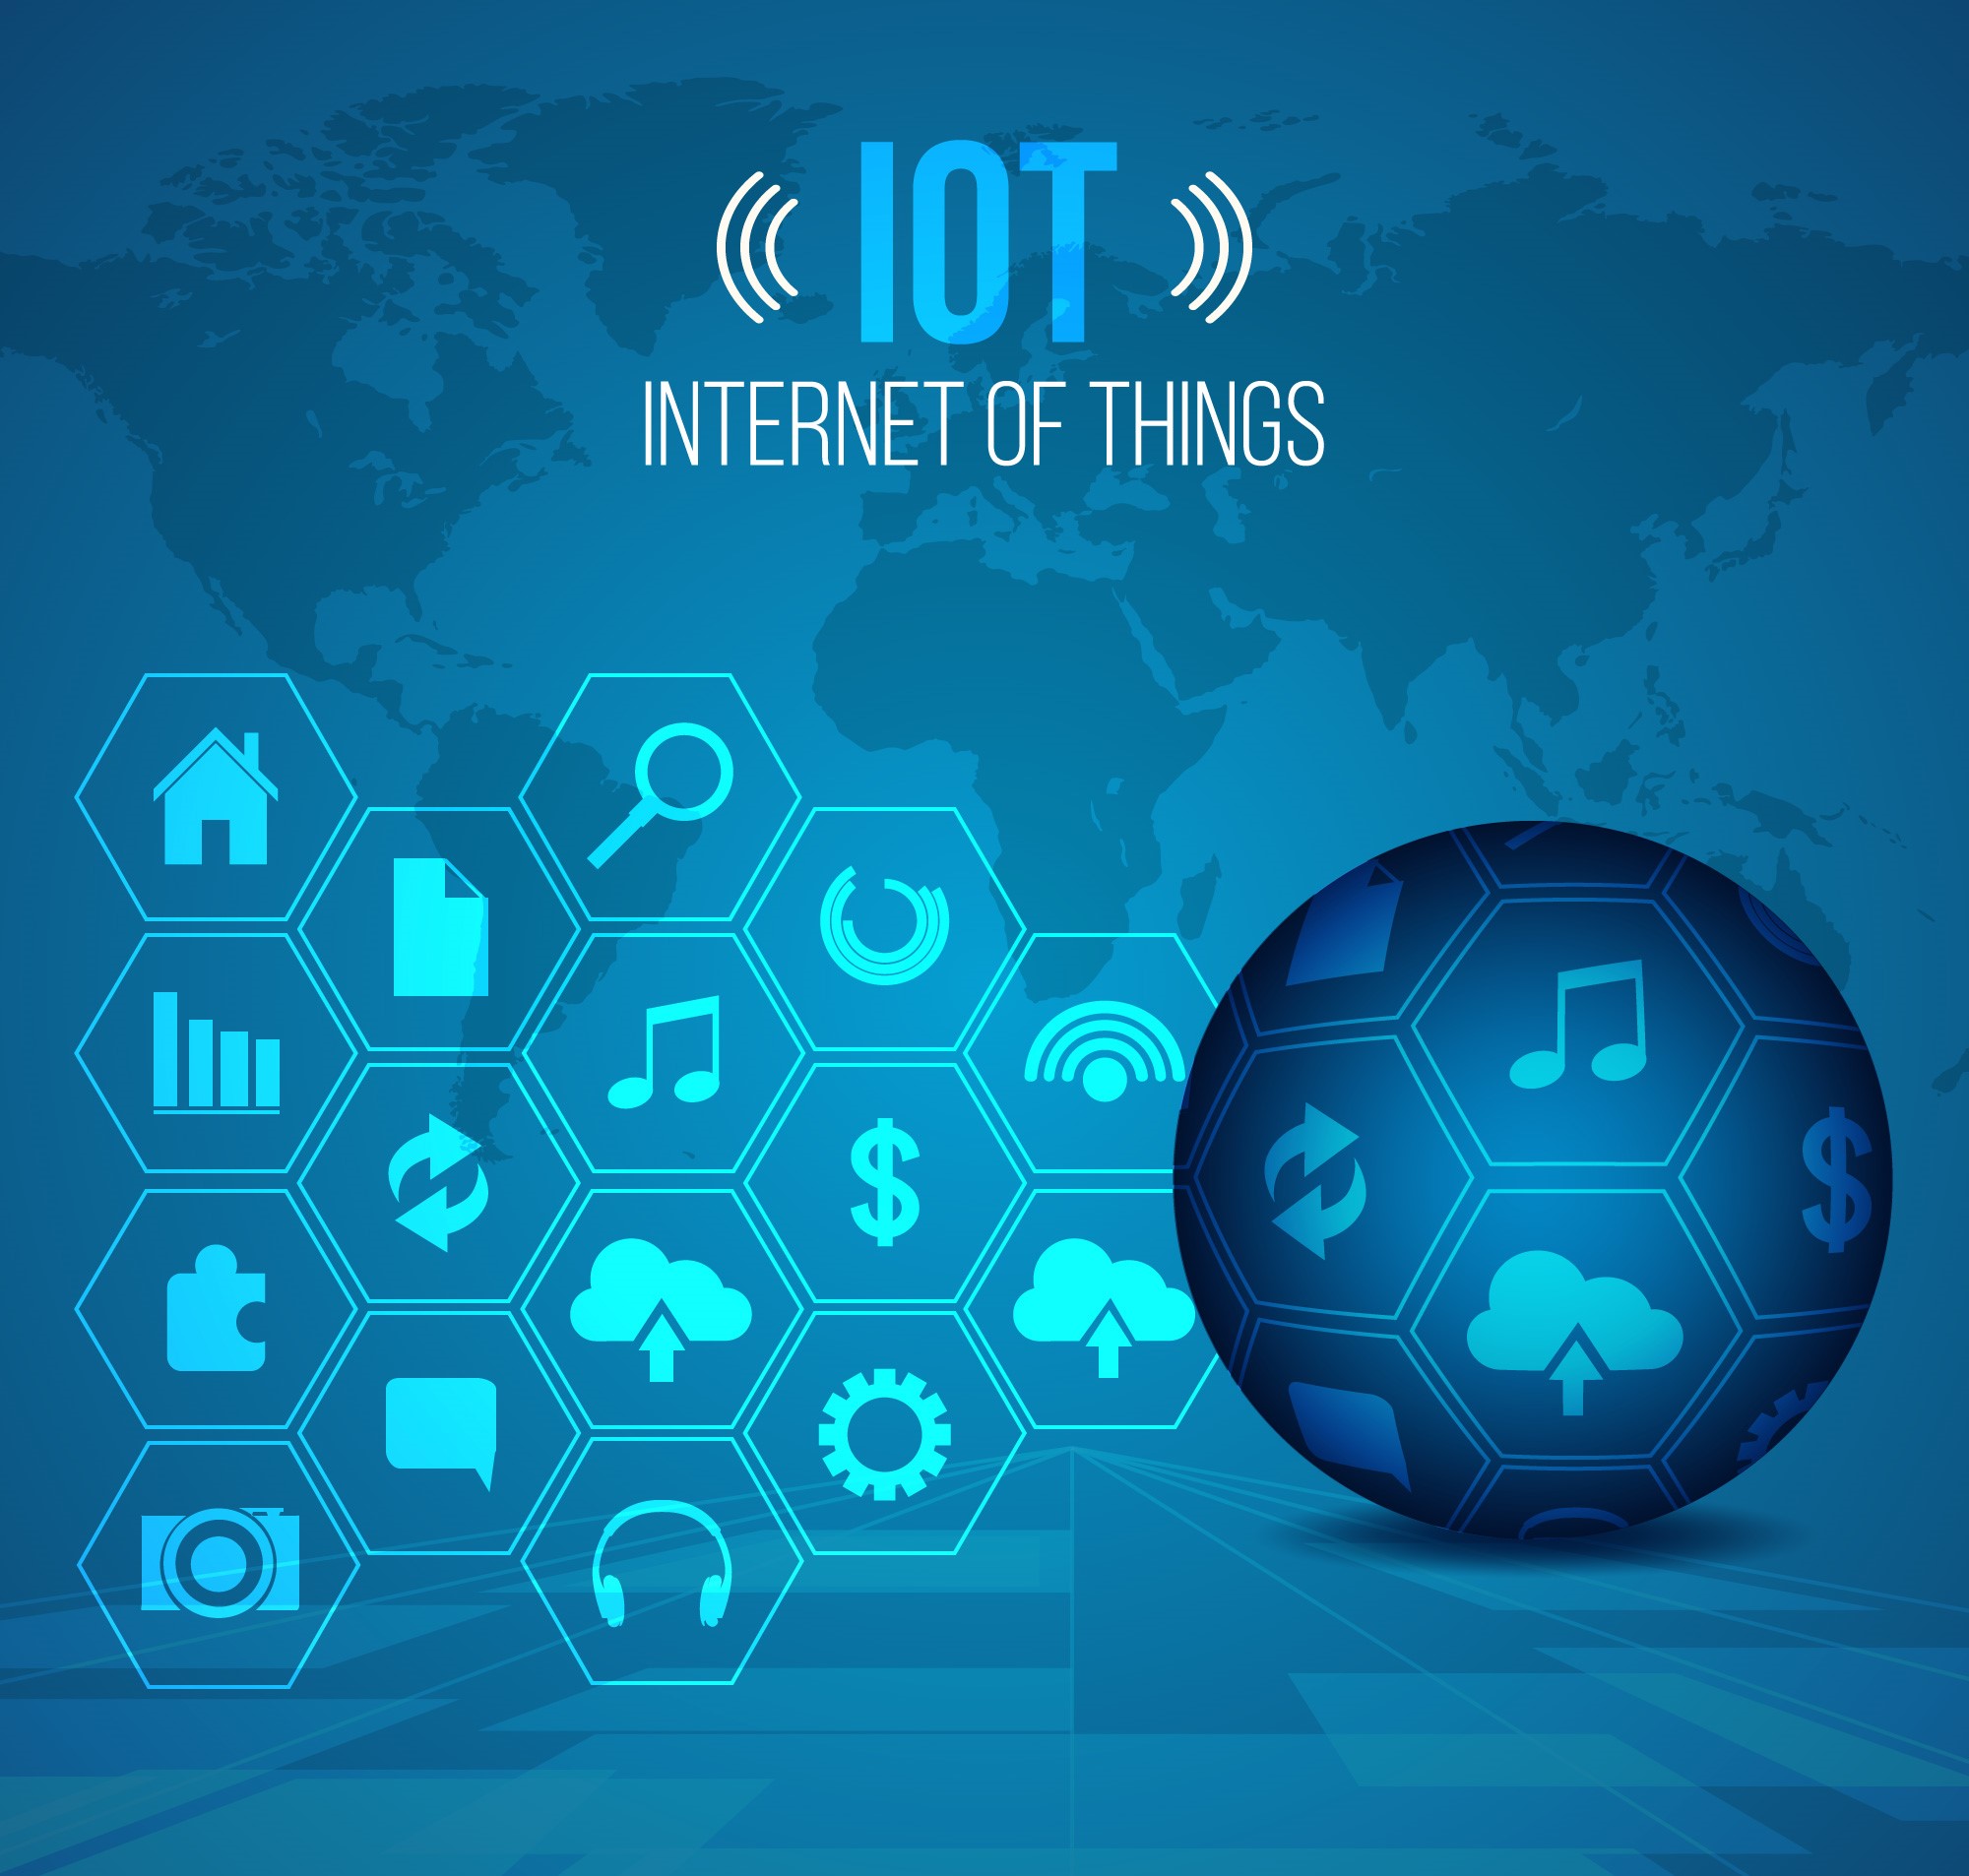 IoT: What Can You Expect in the Future?